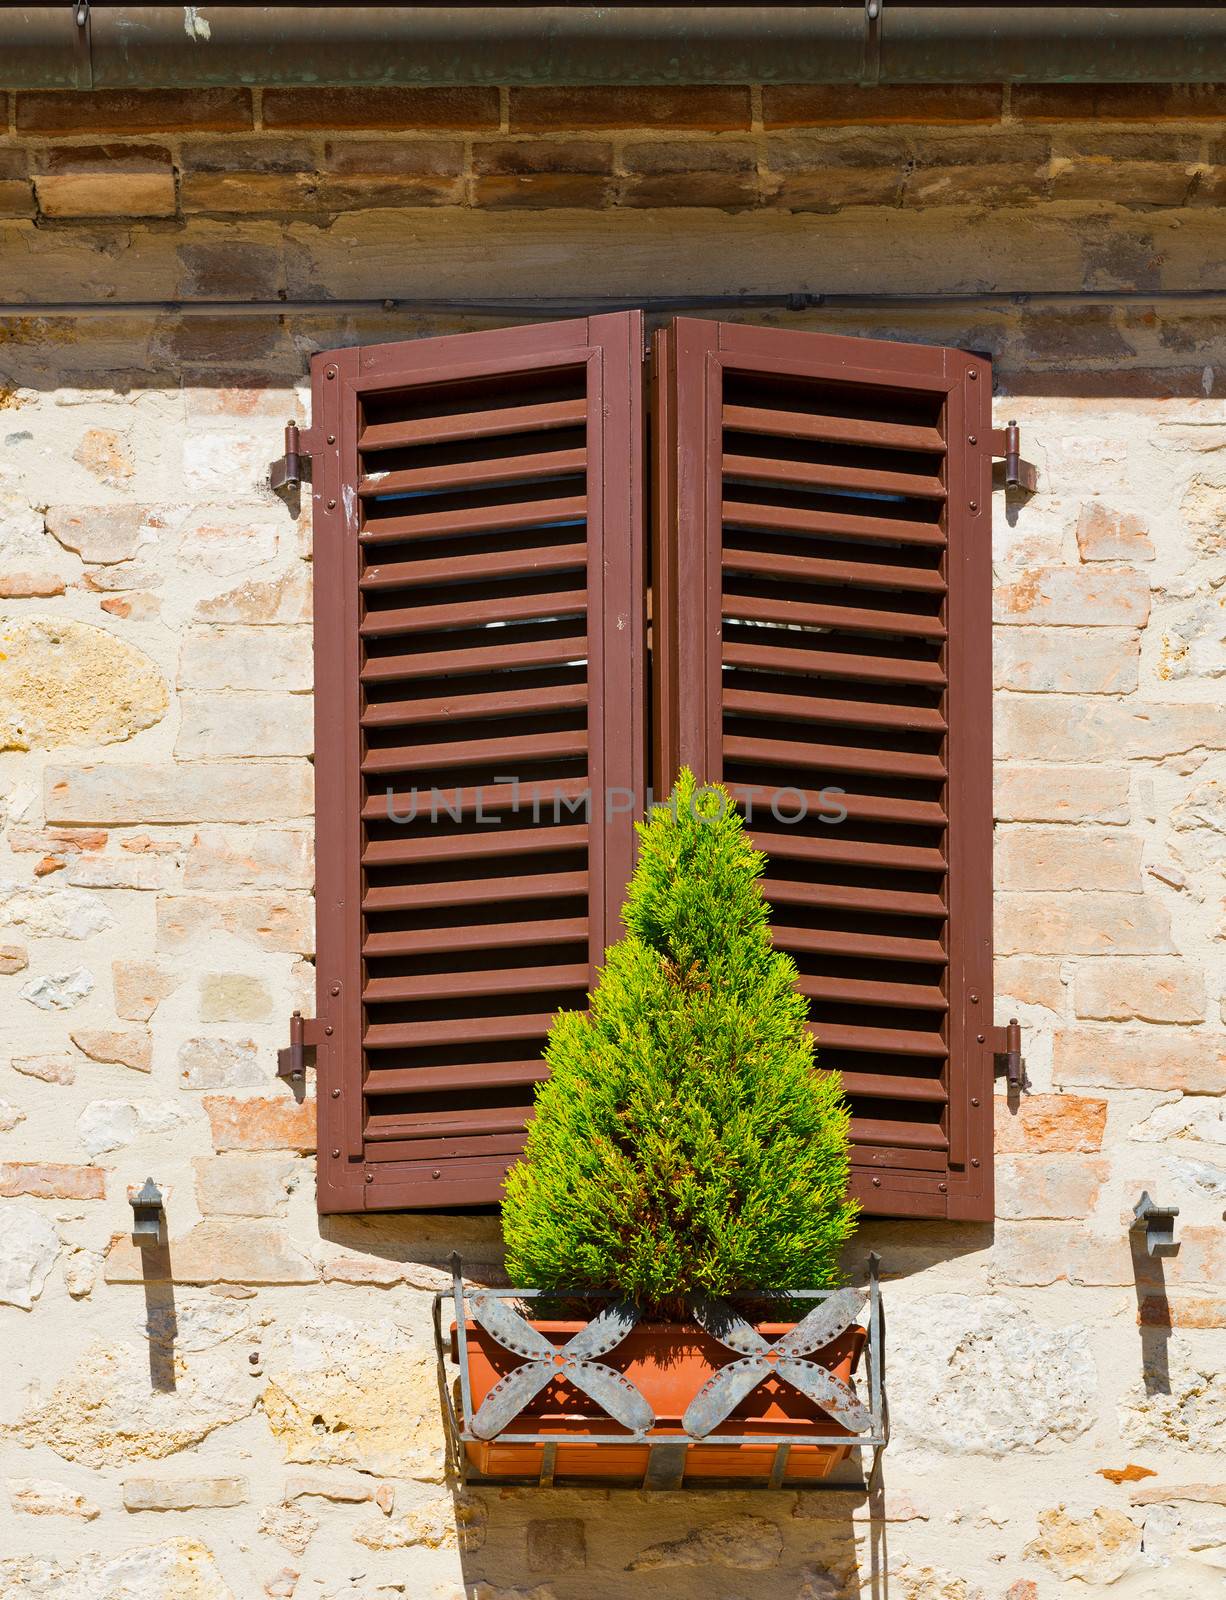 Window on the Facade of the Restored Italian Home